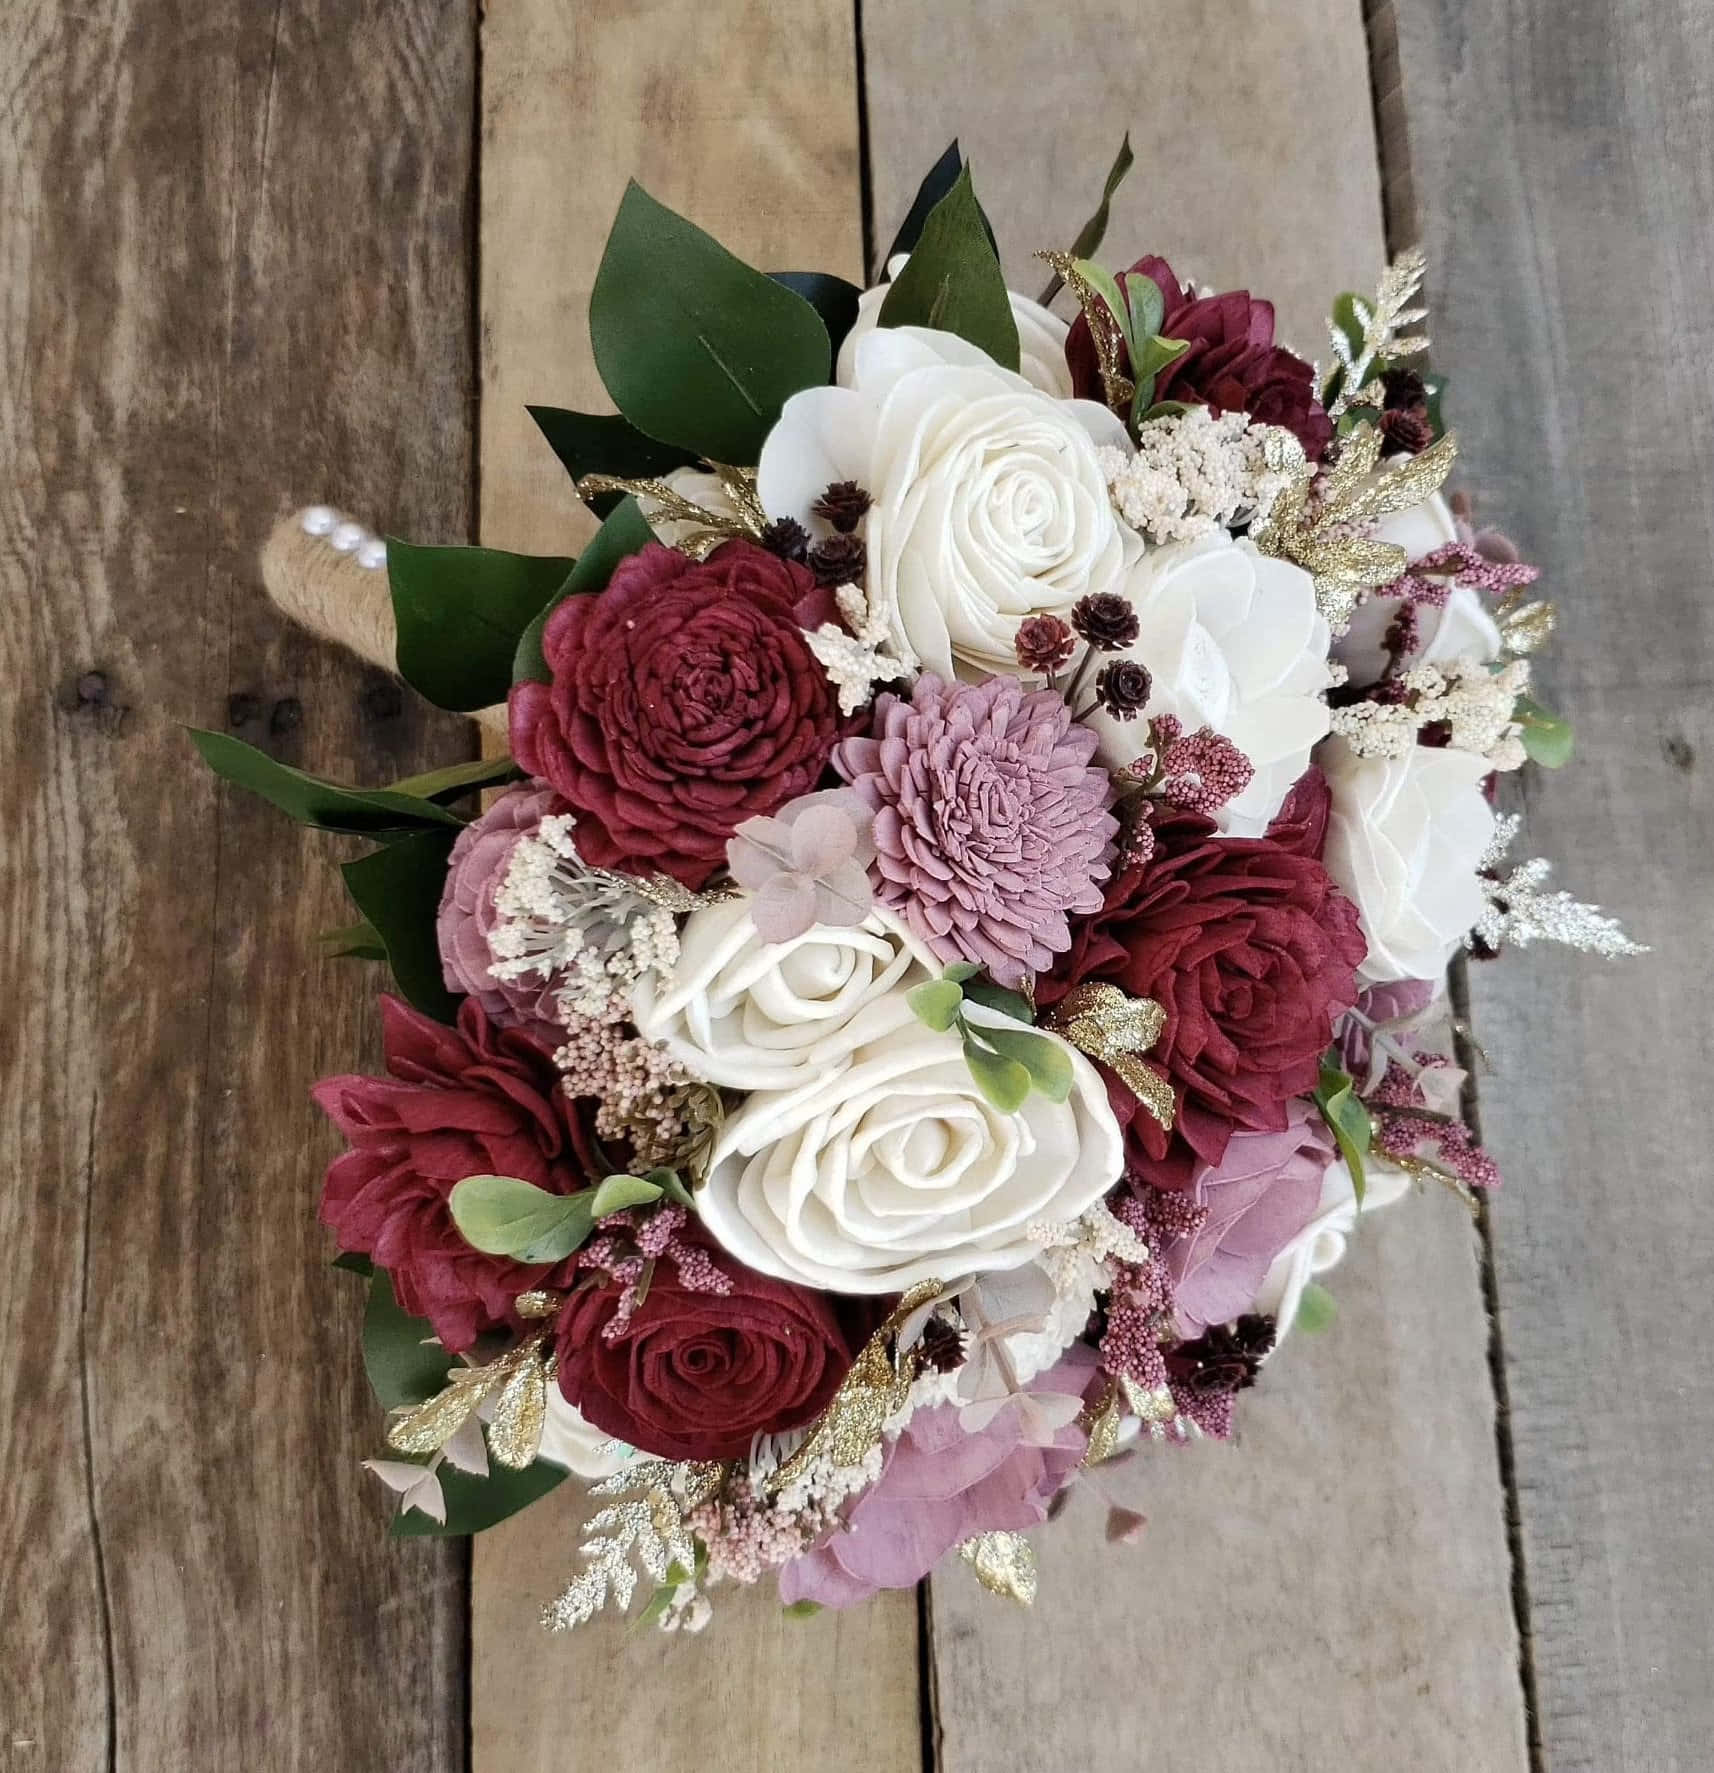 A Bouquet Of Burgundy And White Flowers On A Wooden Table